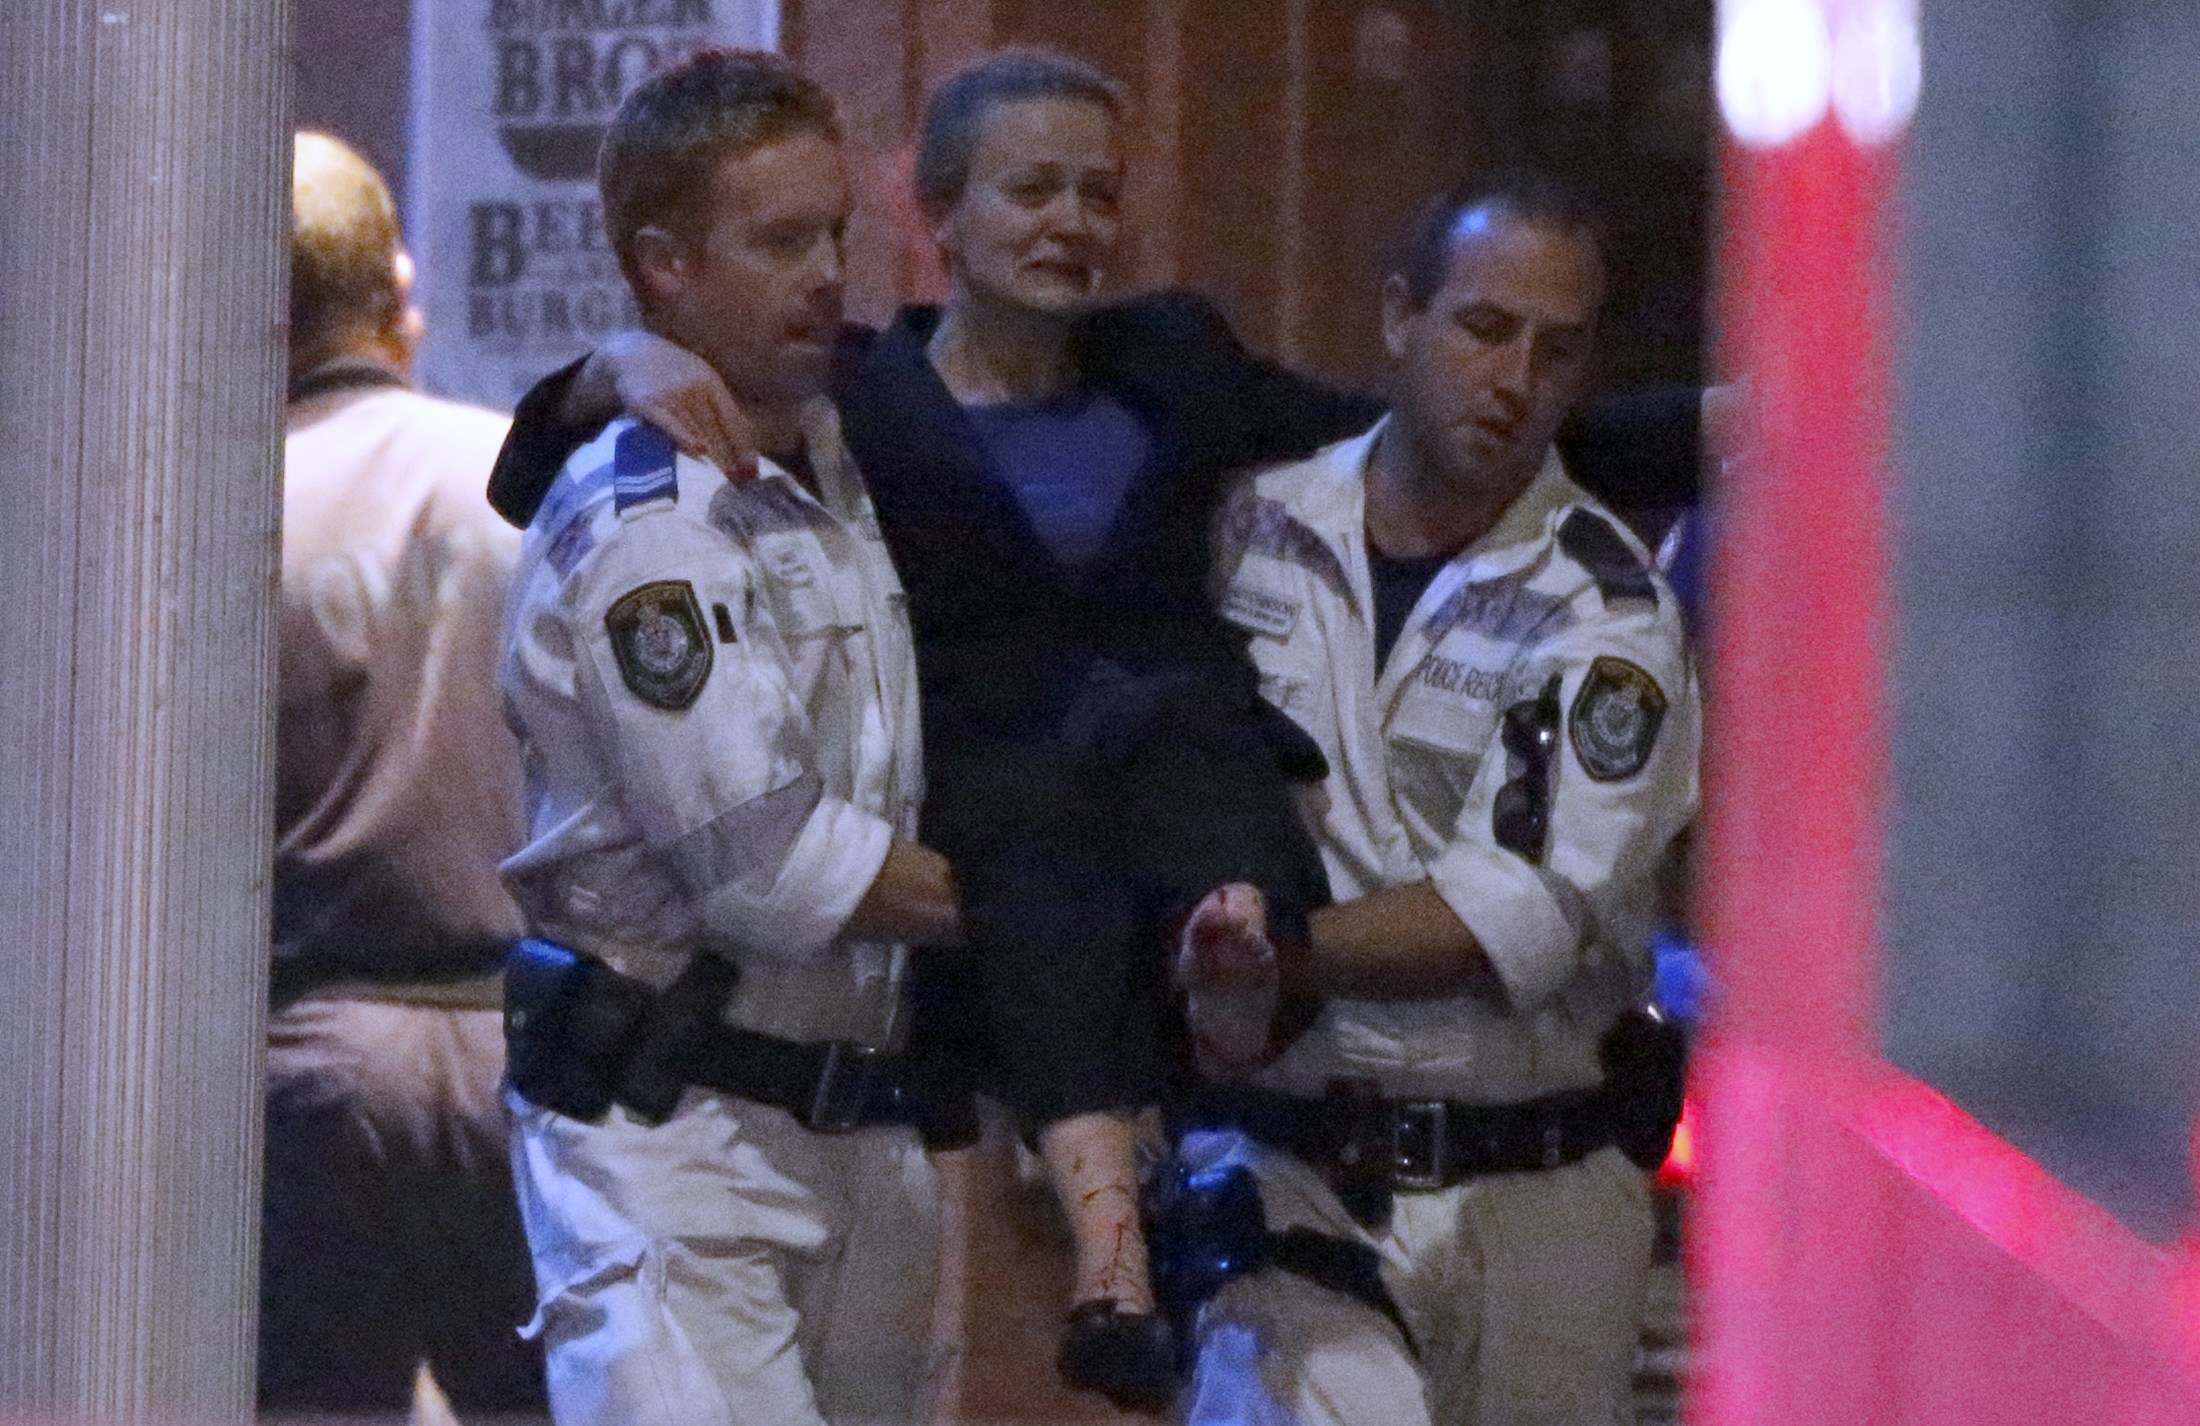 Police storm Sydney cafe to end hostage siege, three dead